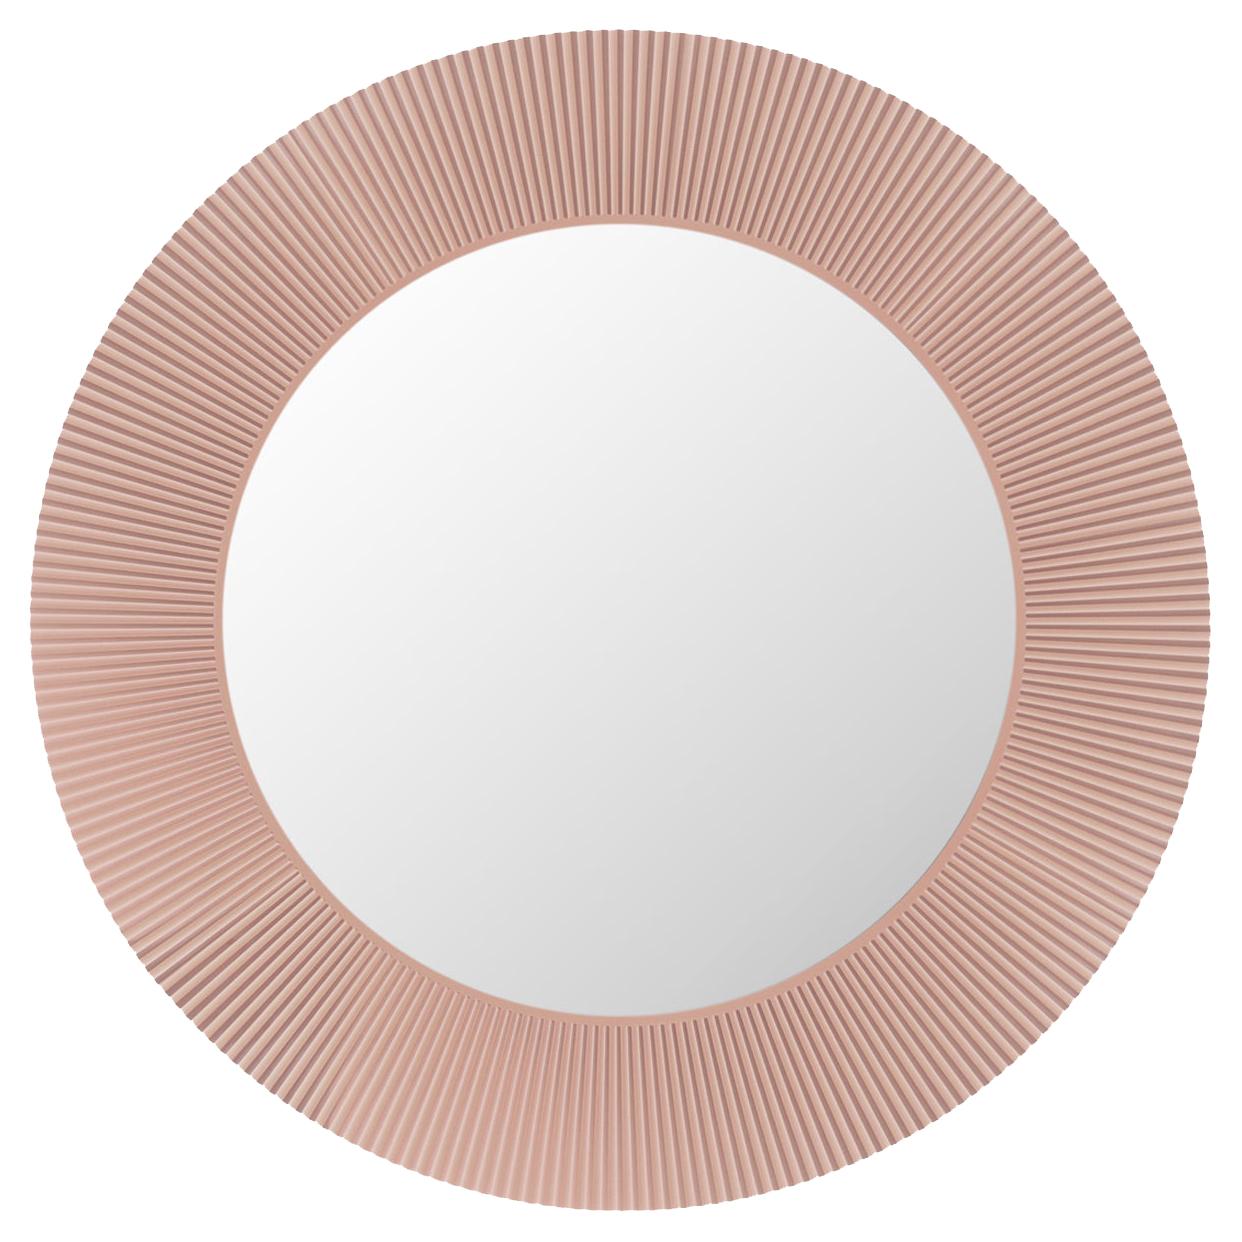 Kartell All Saints Mirror in Nude by Ludovica and Roberto Palomba